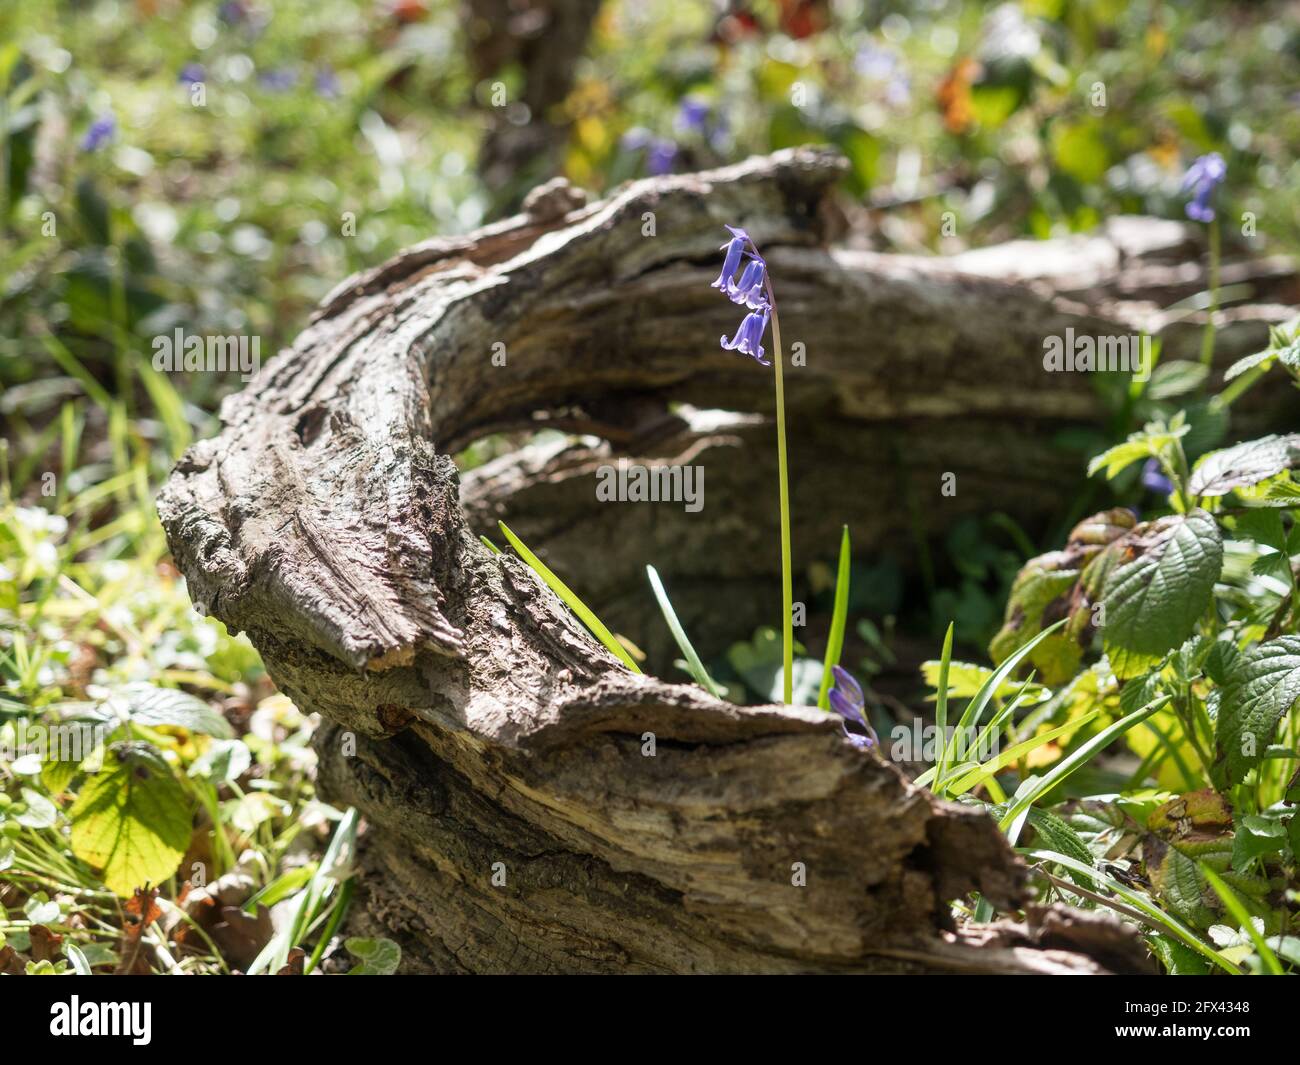 single English Bluebells stem isolated in a curved curving log on forest woodland floor Stock Photo